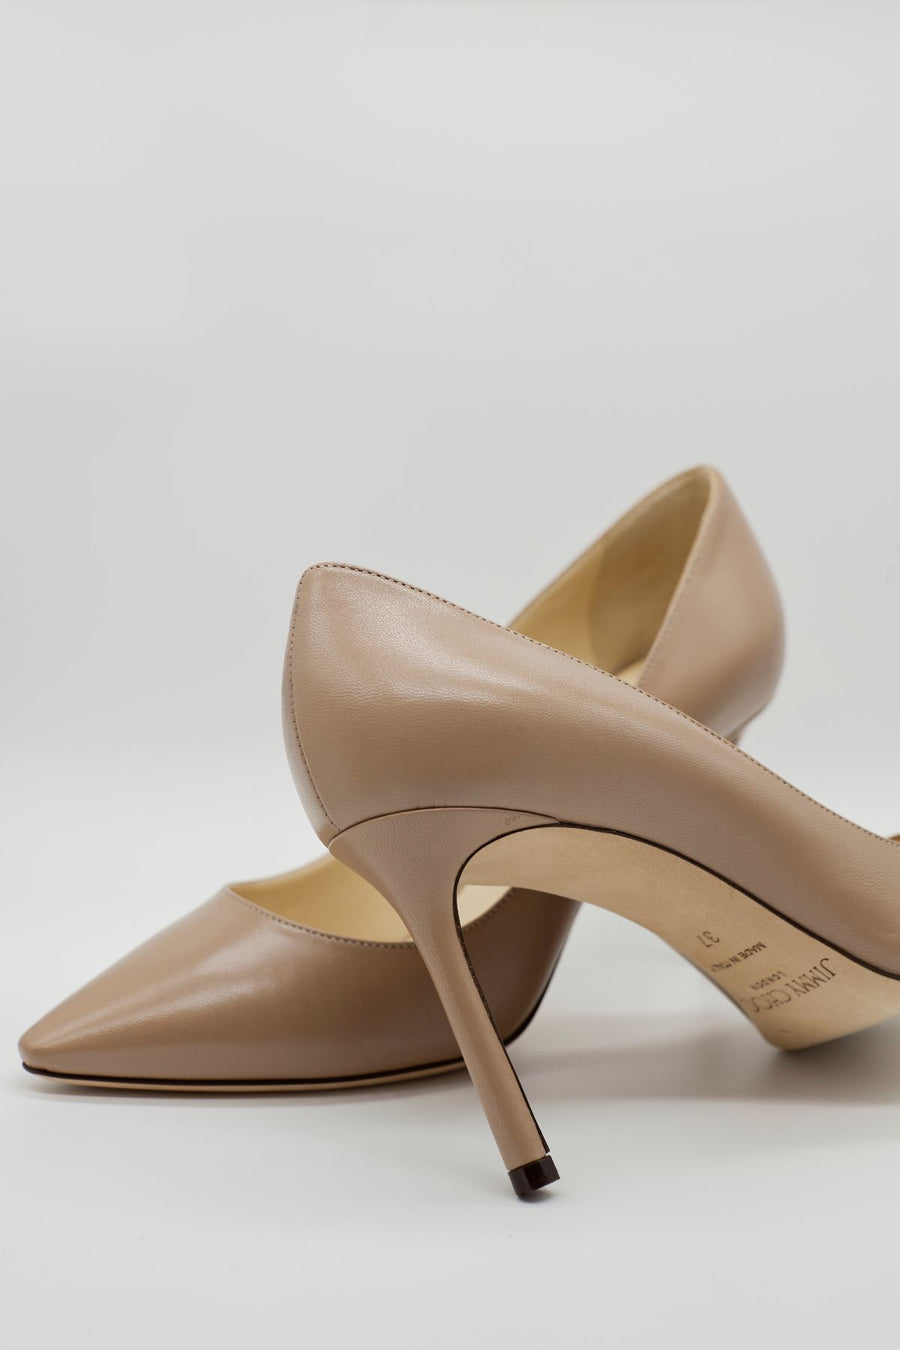 Nude Pointy Toe Stiletto Pump Shoes